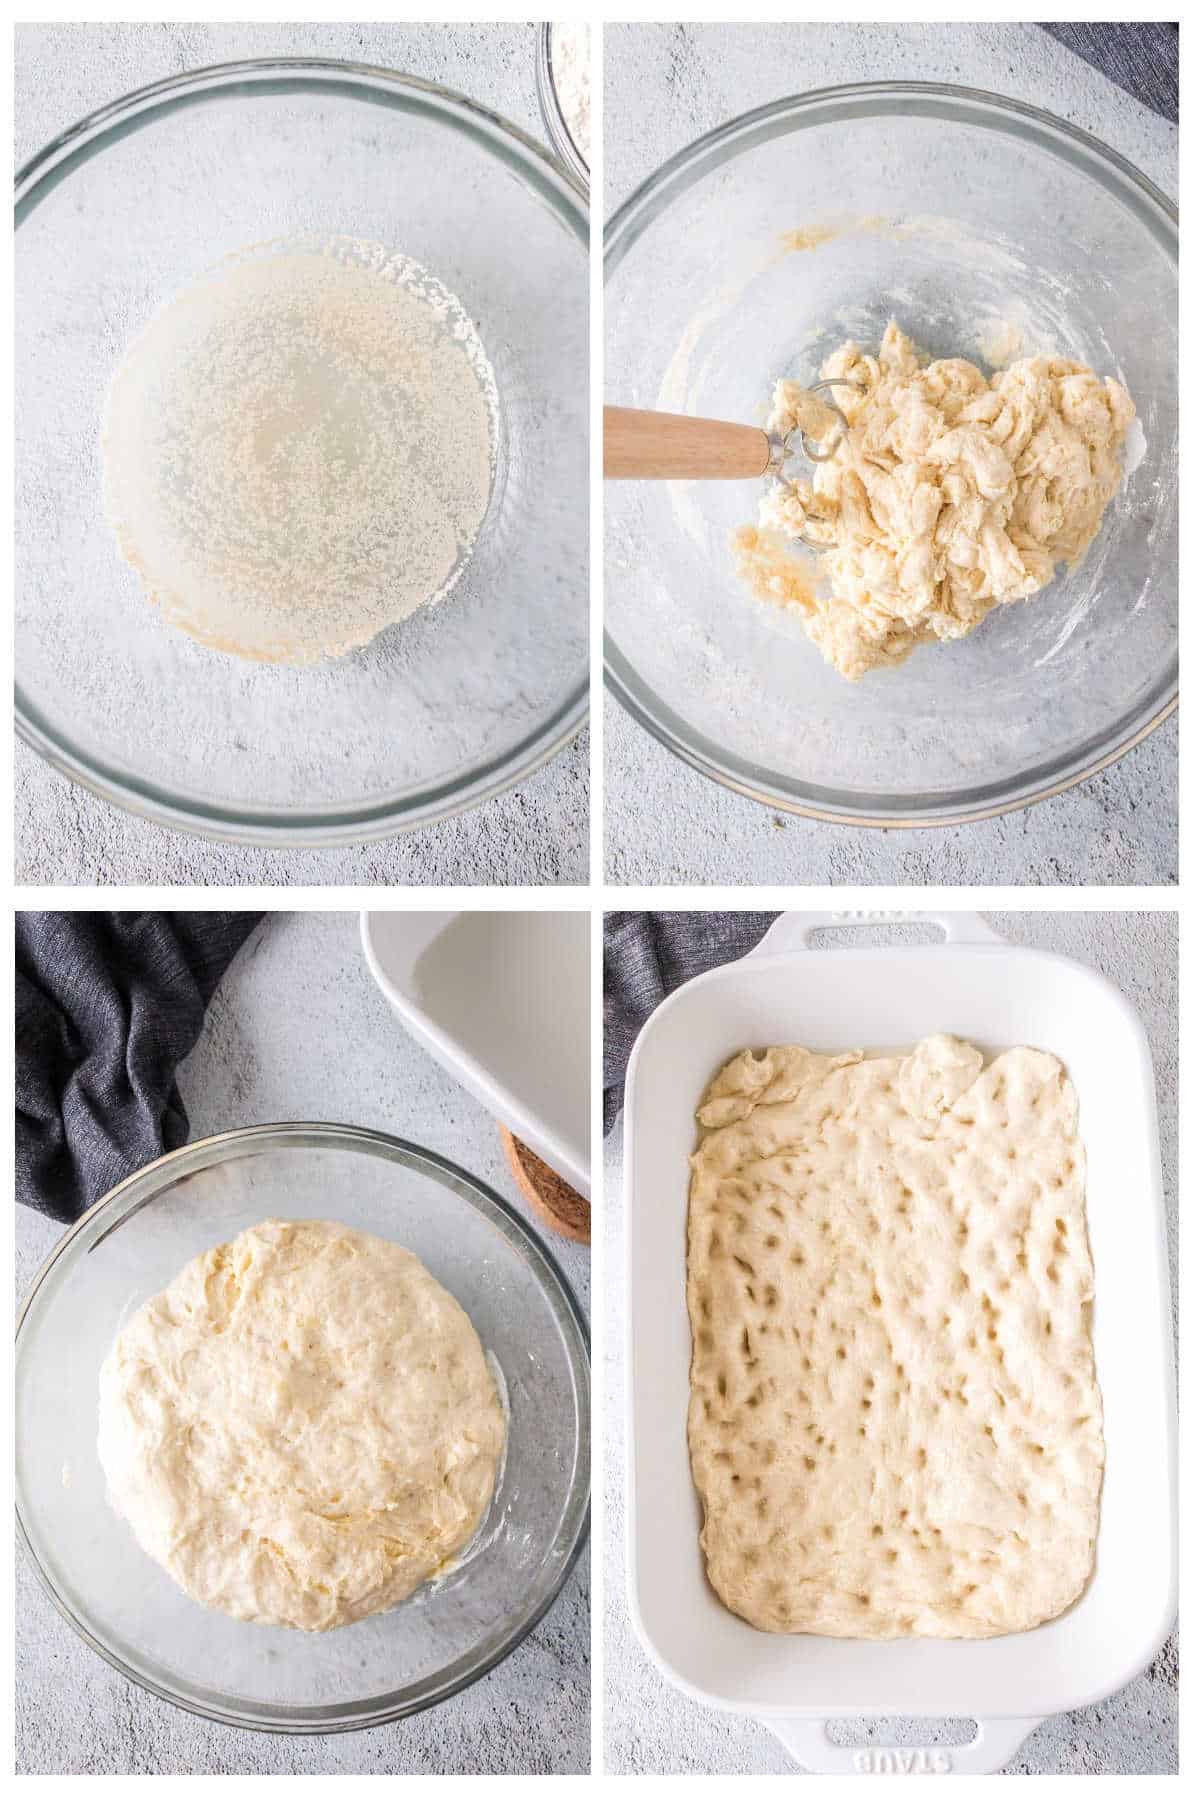 Step by step images showing how to make focaccia.